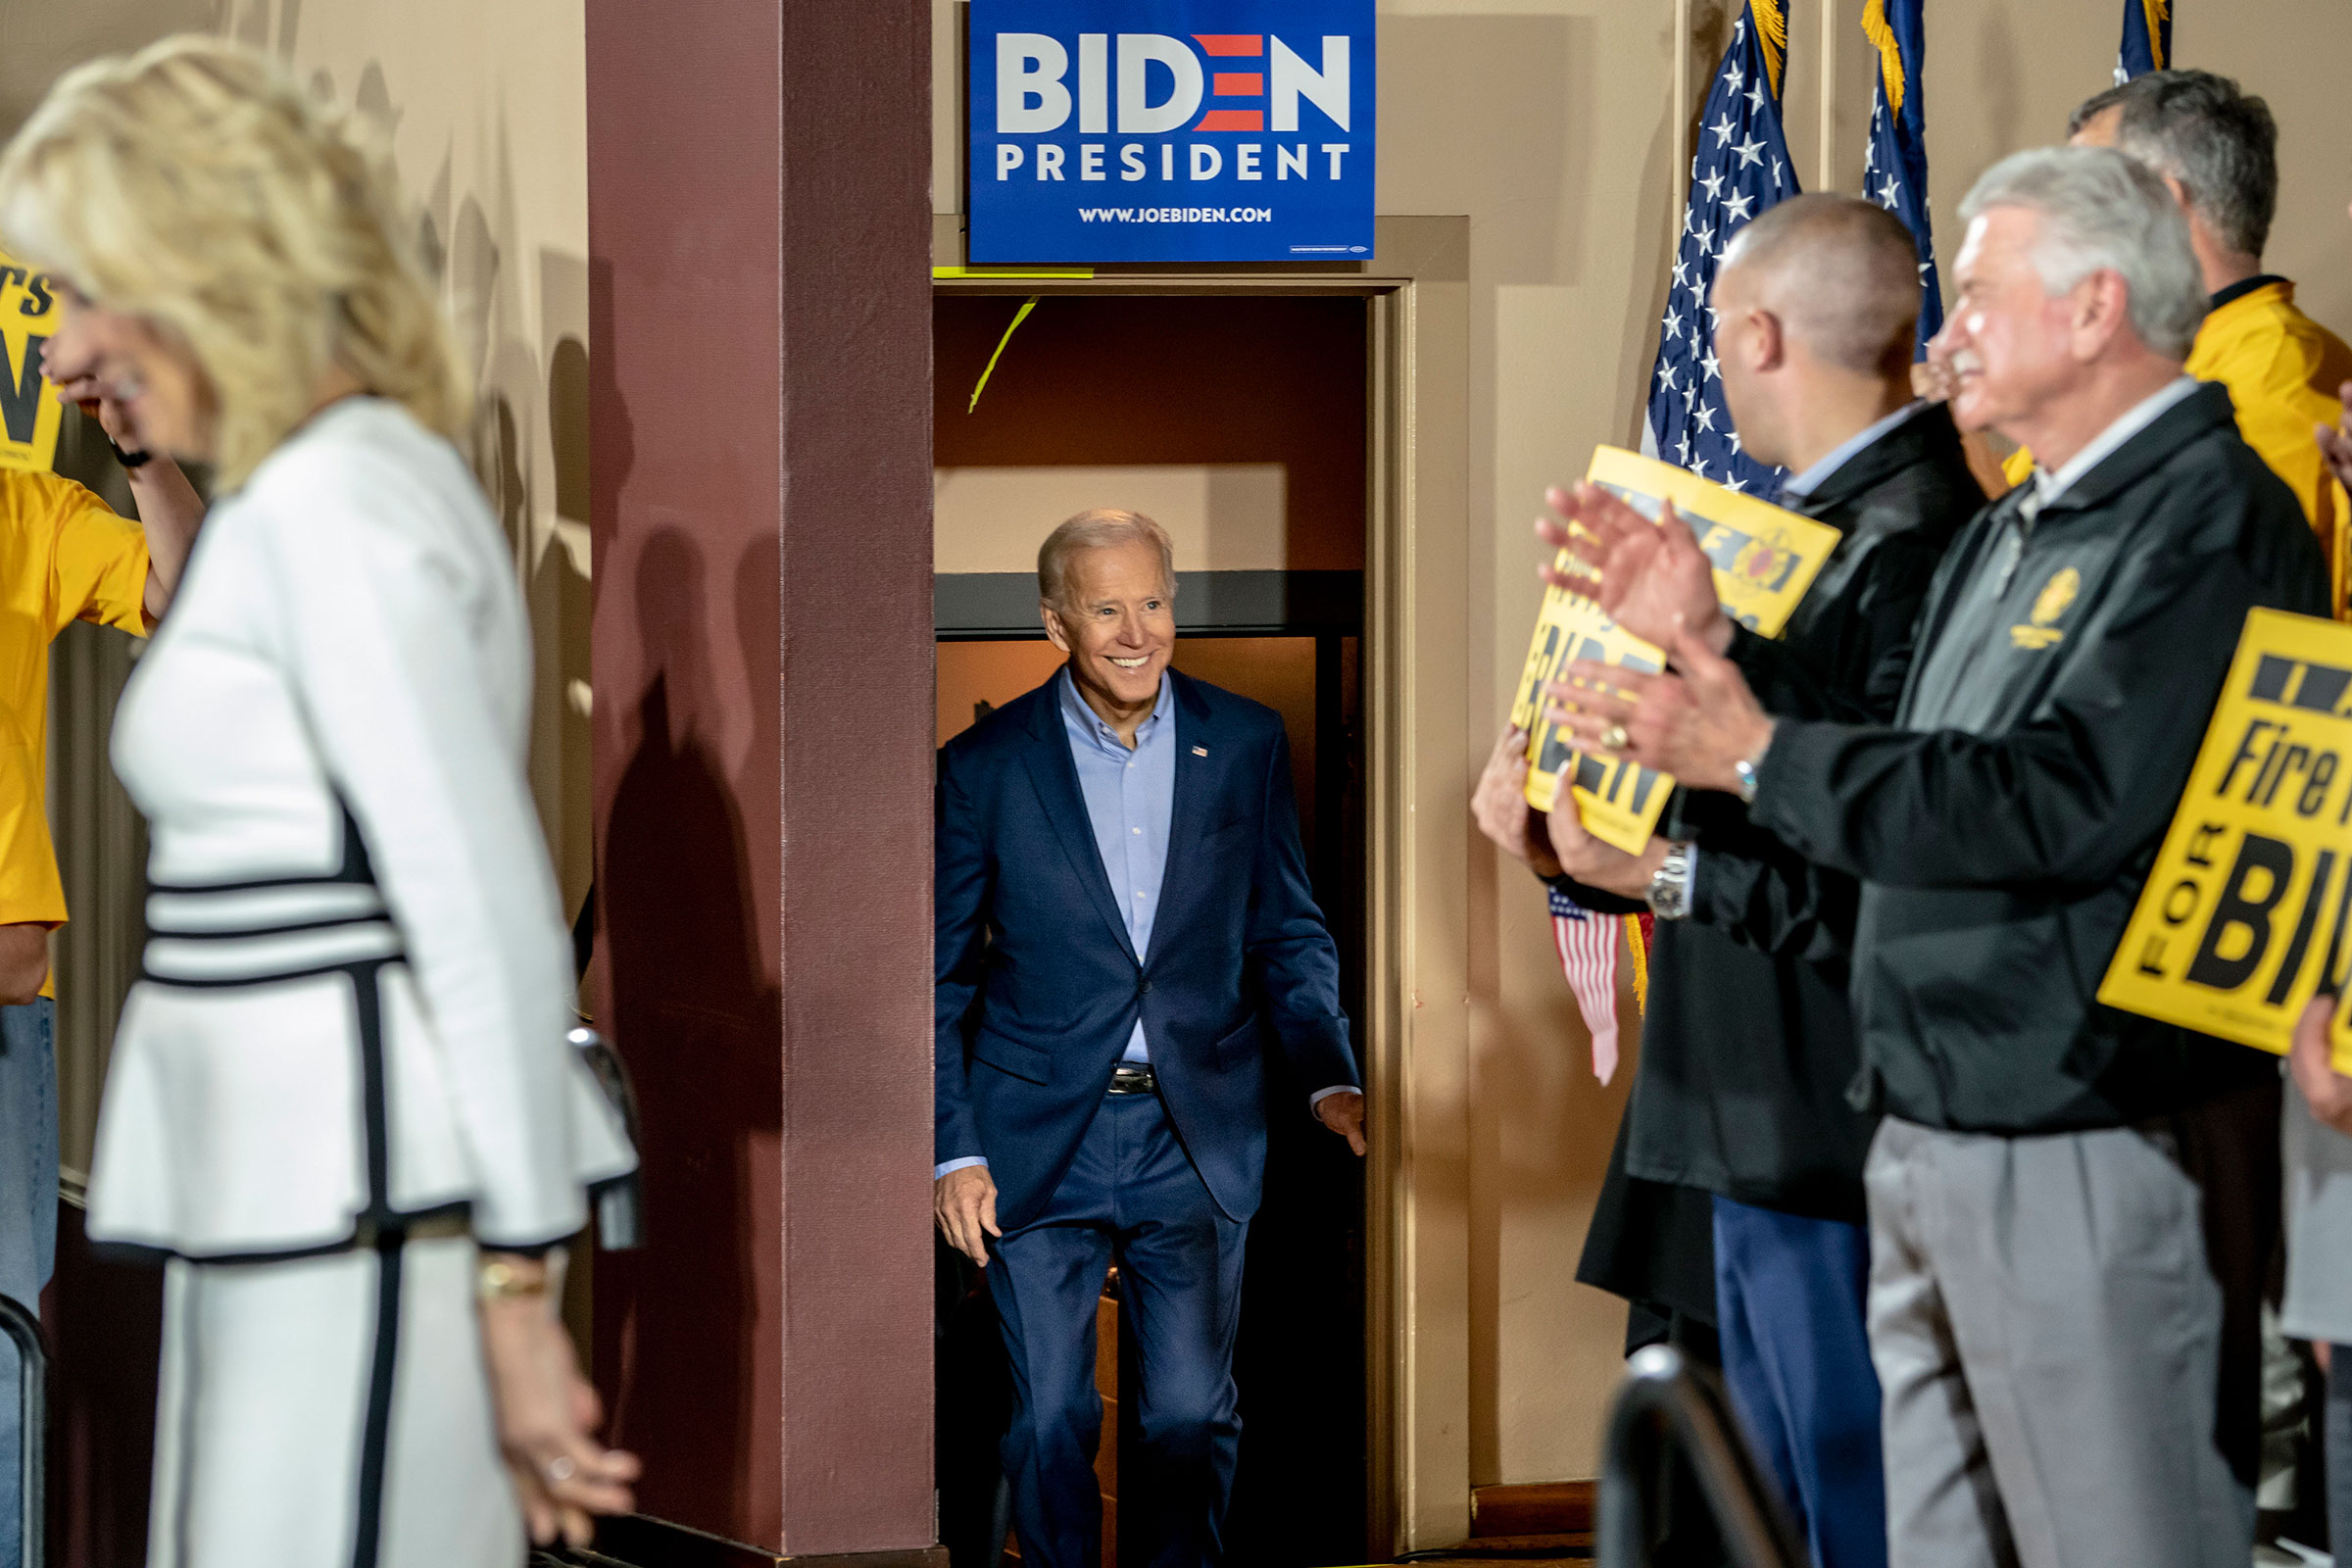 Biden made his first campaign stop on April 29 at the Teamsters Local 249 hall in Pittsburgh.